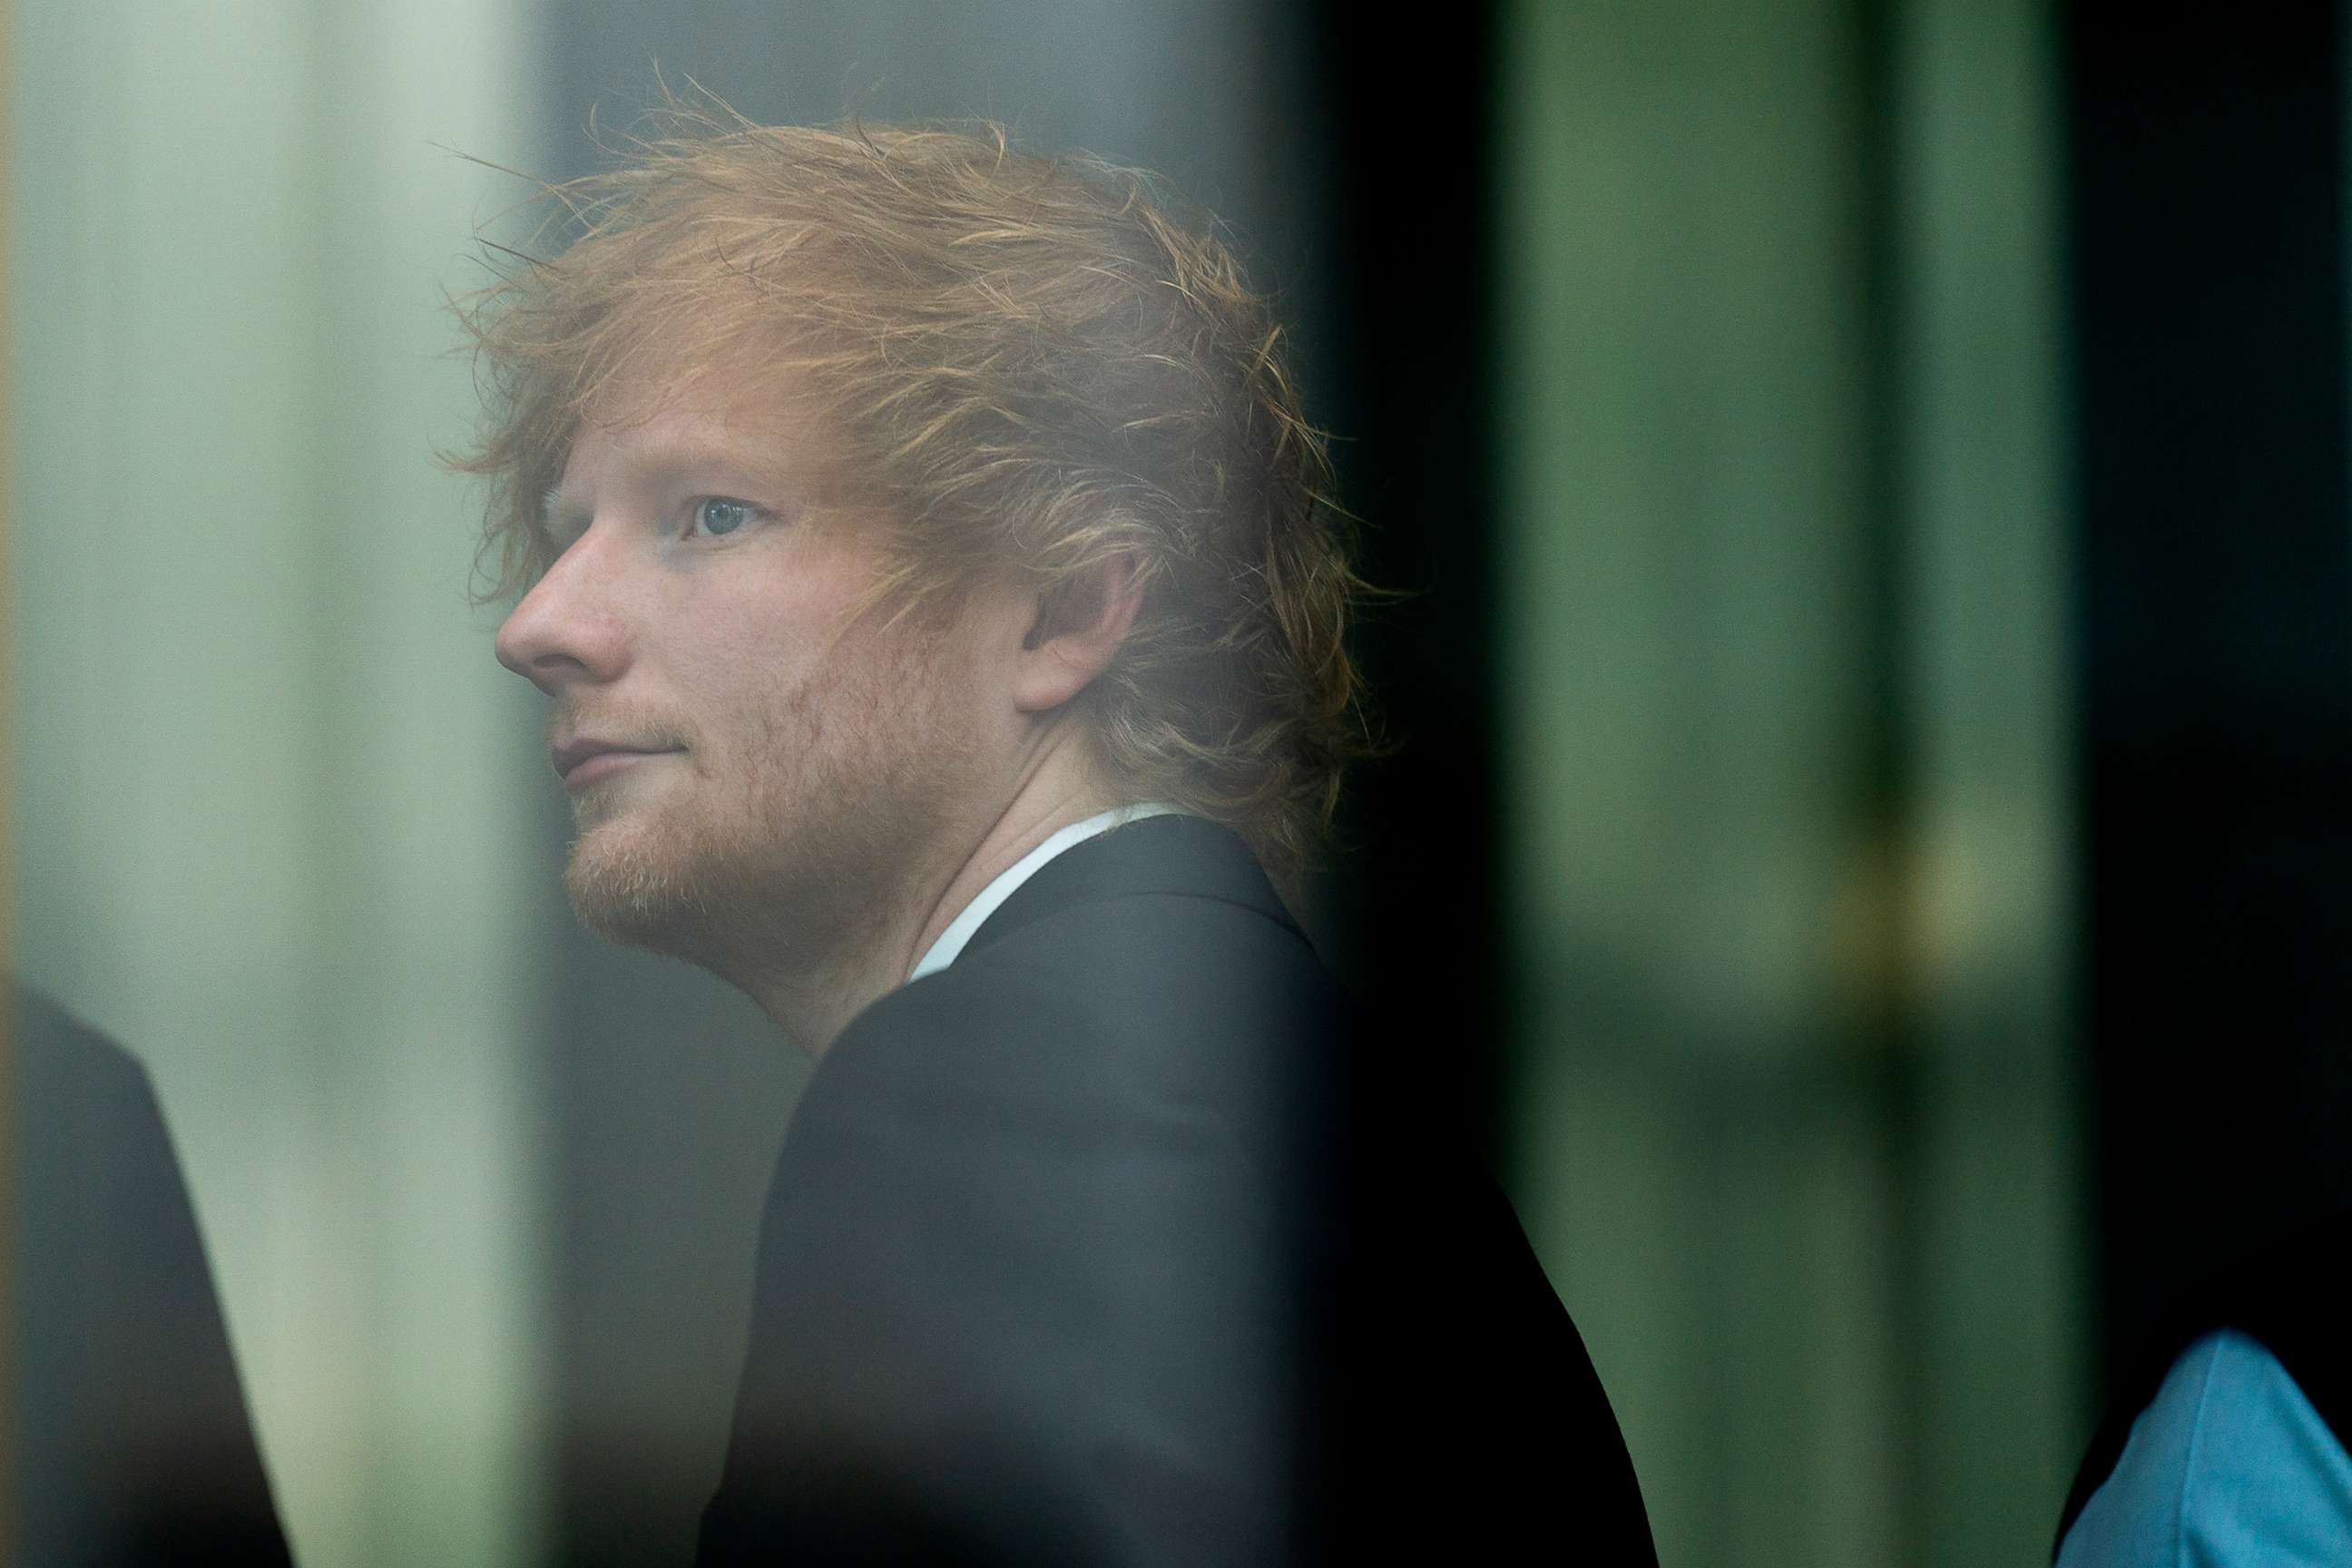 Ed Sheeran Lawyers Want Concert Video Banned in Thinking Out Loud Case